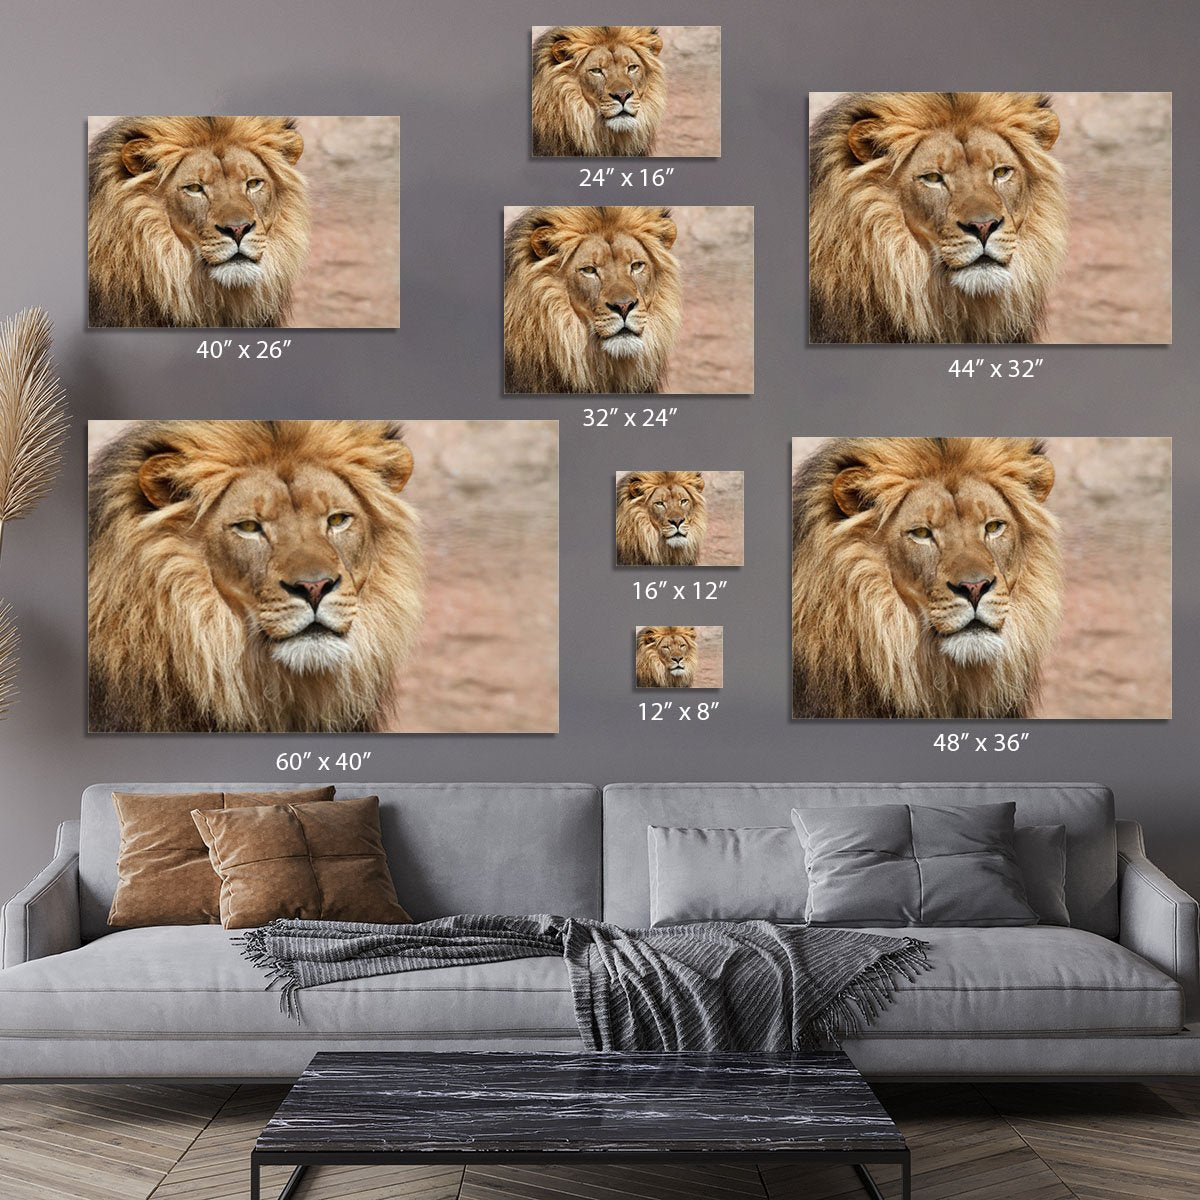 Lion Canvas Print or Poster